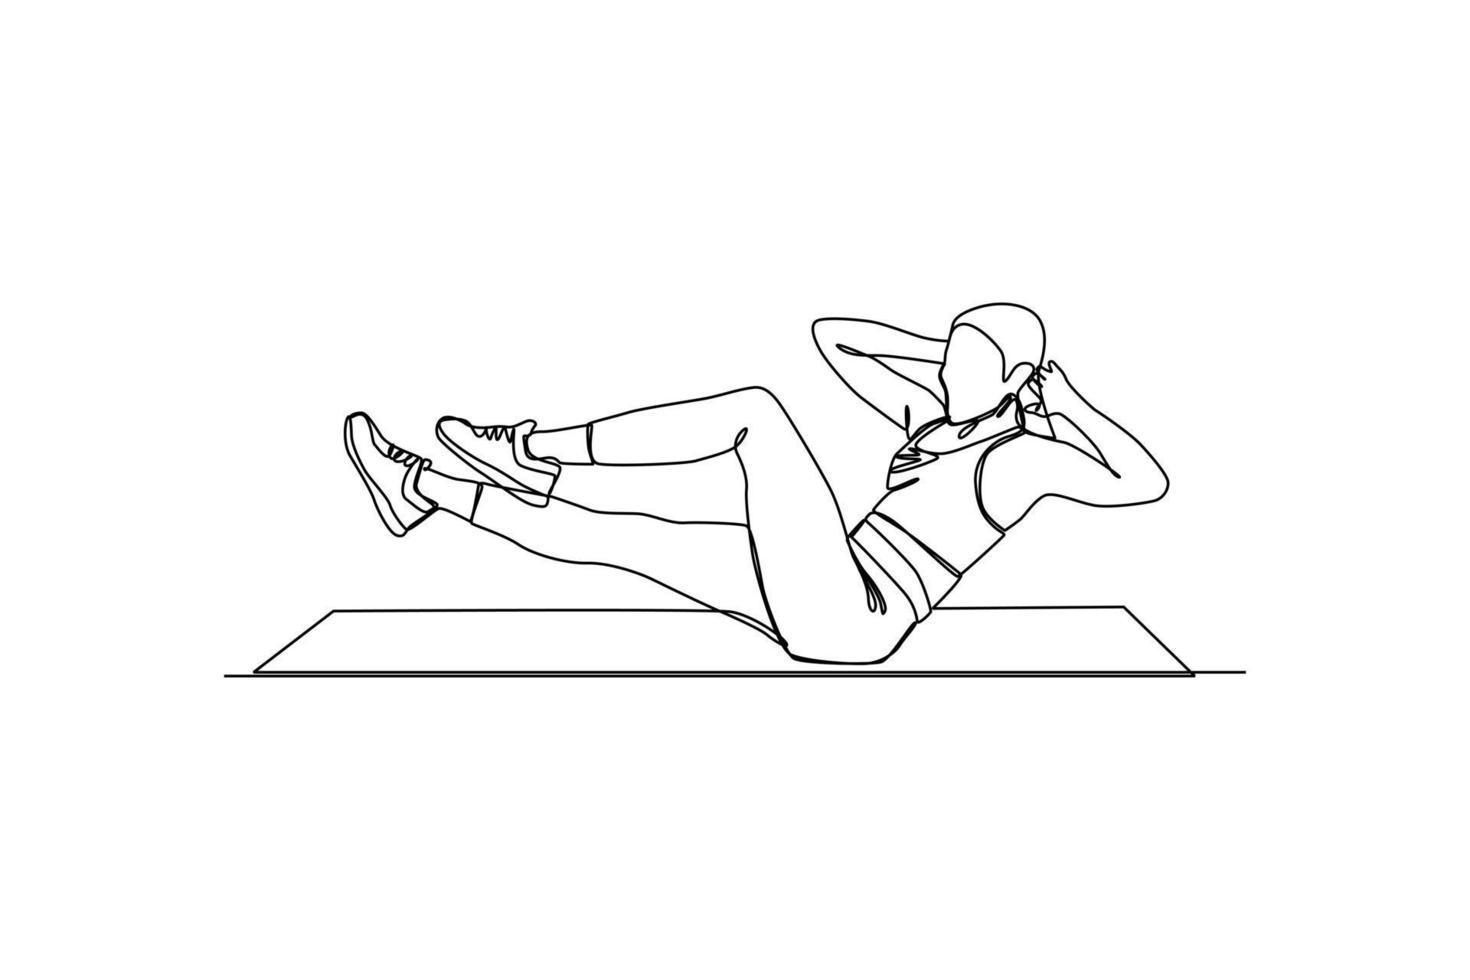 Continuous one-line drawing a man doing bicycle crunch. Fitness activity concept. Single line drawing design graphic vector illustration